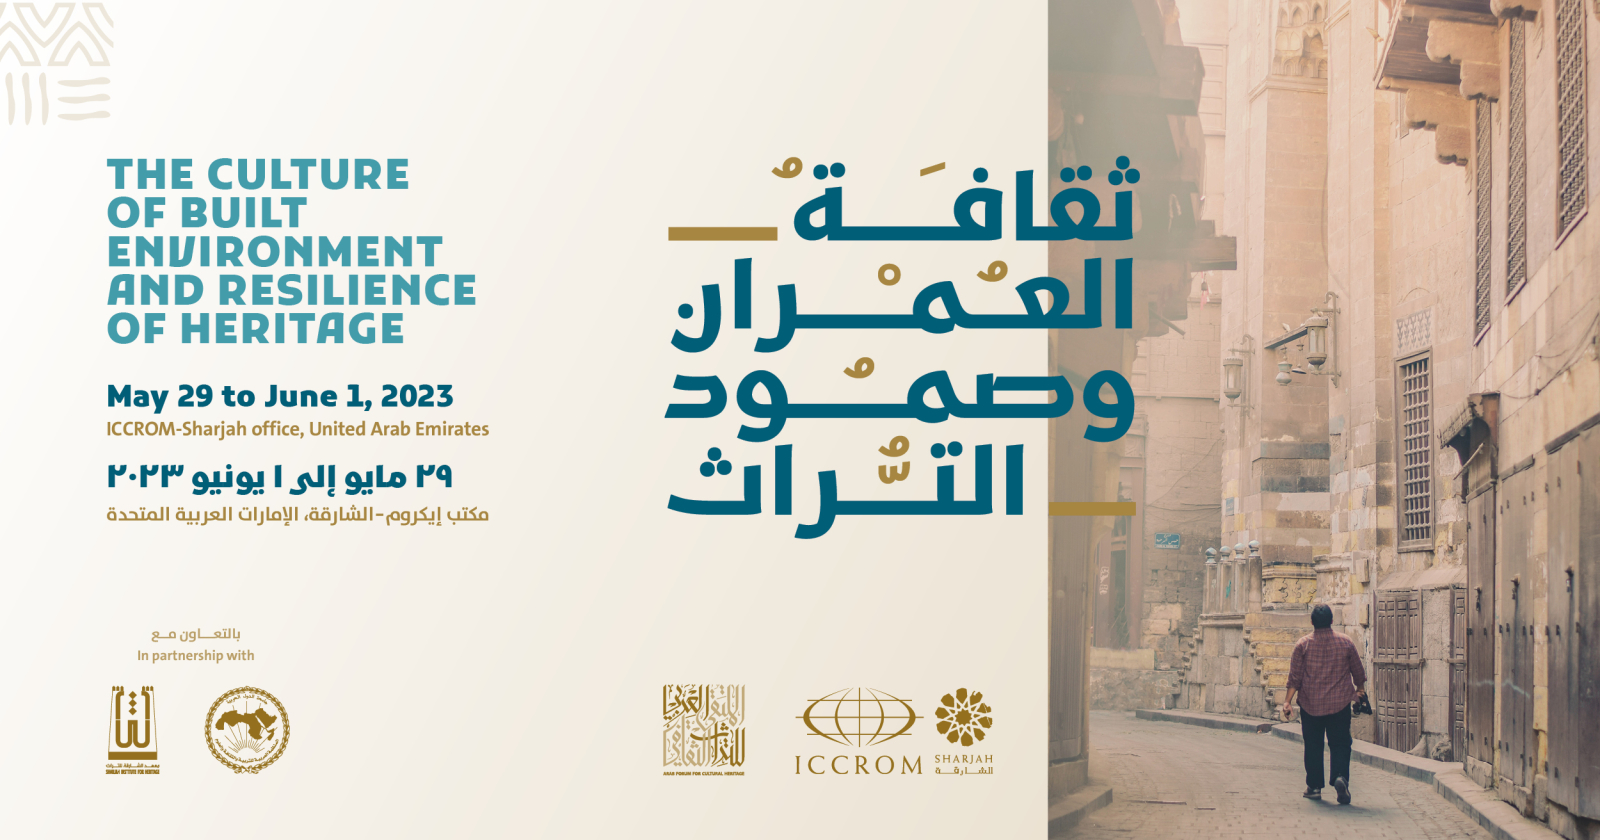 4th Arab Forum for Cultural Heritage begins on 29 May in Sharjah 